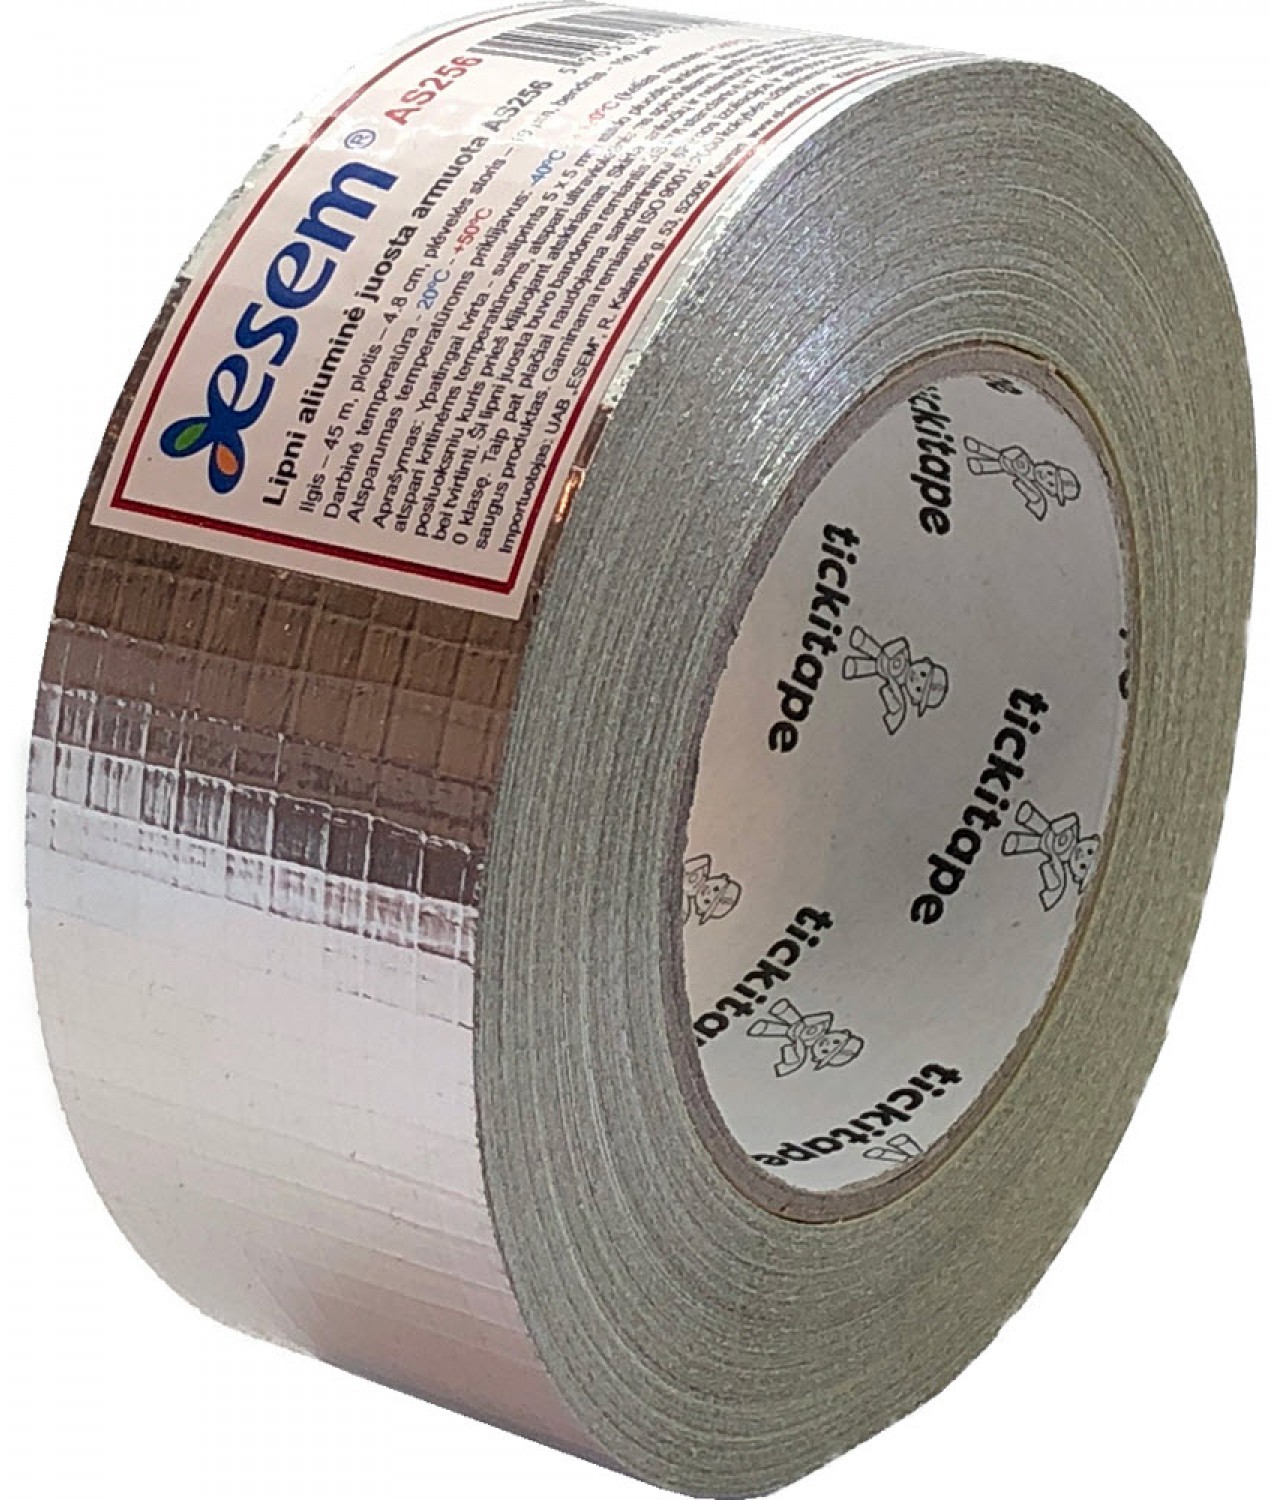 Adhesive aluminum foil tape reinforced for ducts AS256, 4.8 cm x 45 m, -40 - +120 °C